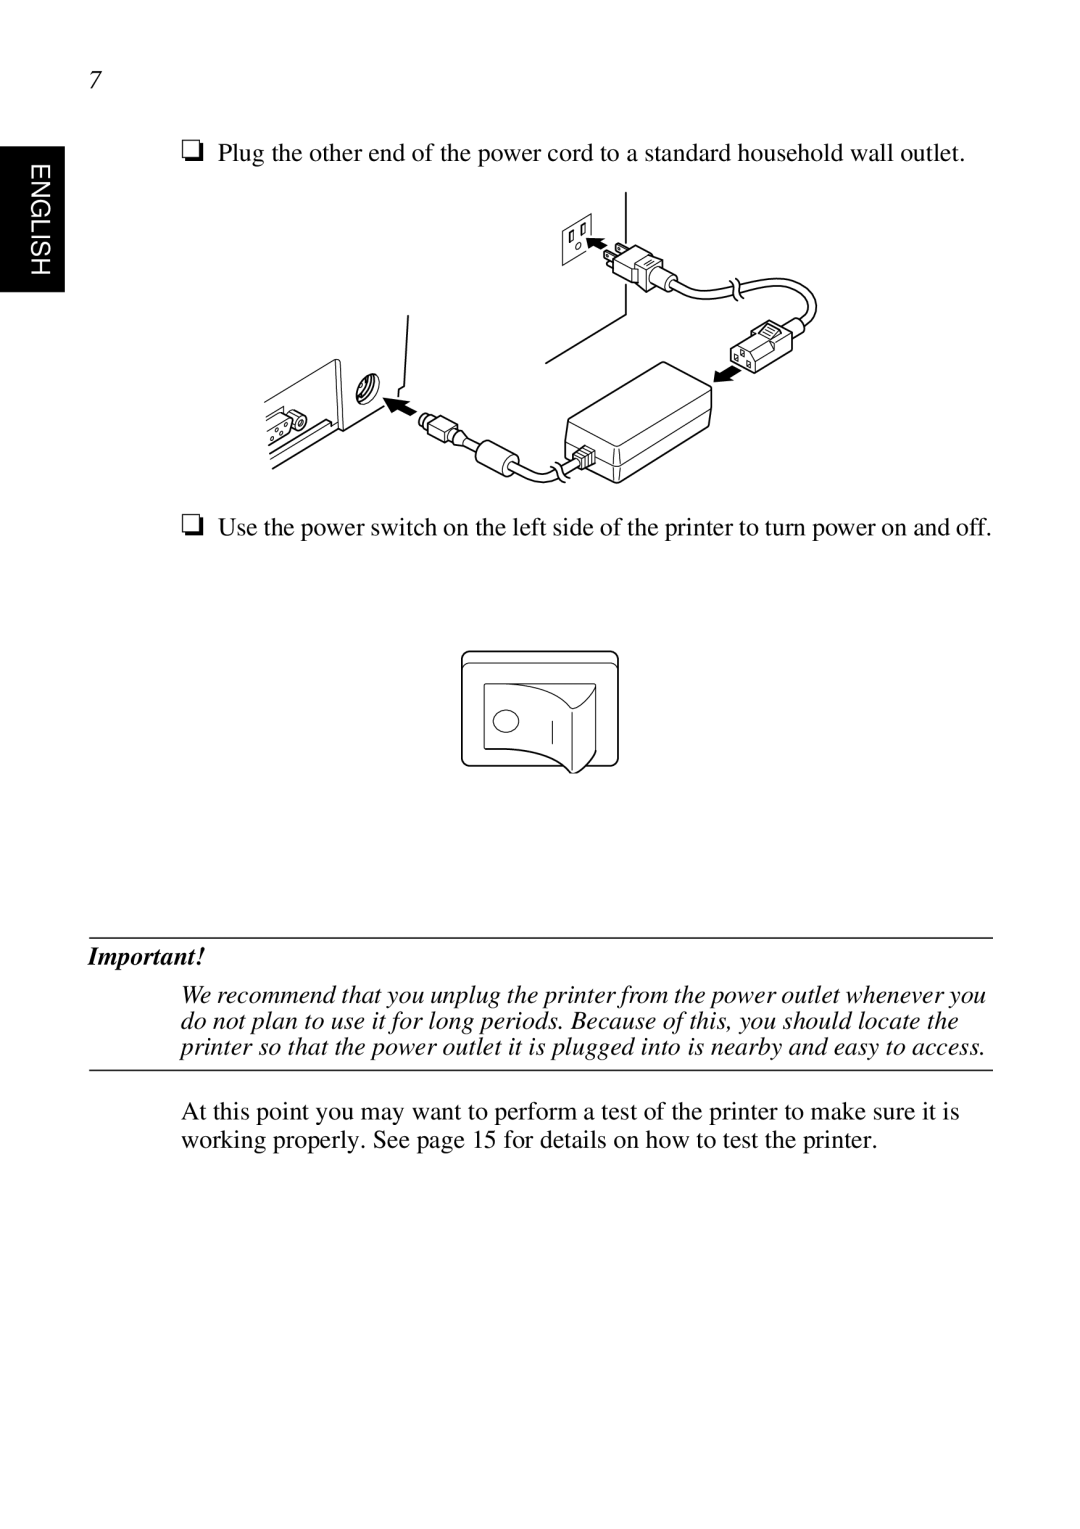 Star Micronics SP298 user manual Plug the other end of the power cord to a standard household wall outlet, English 